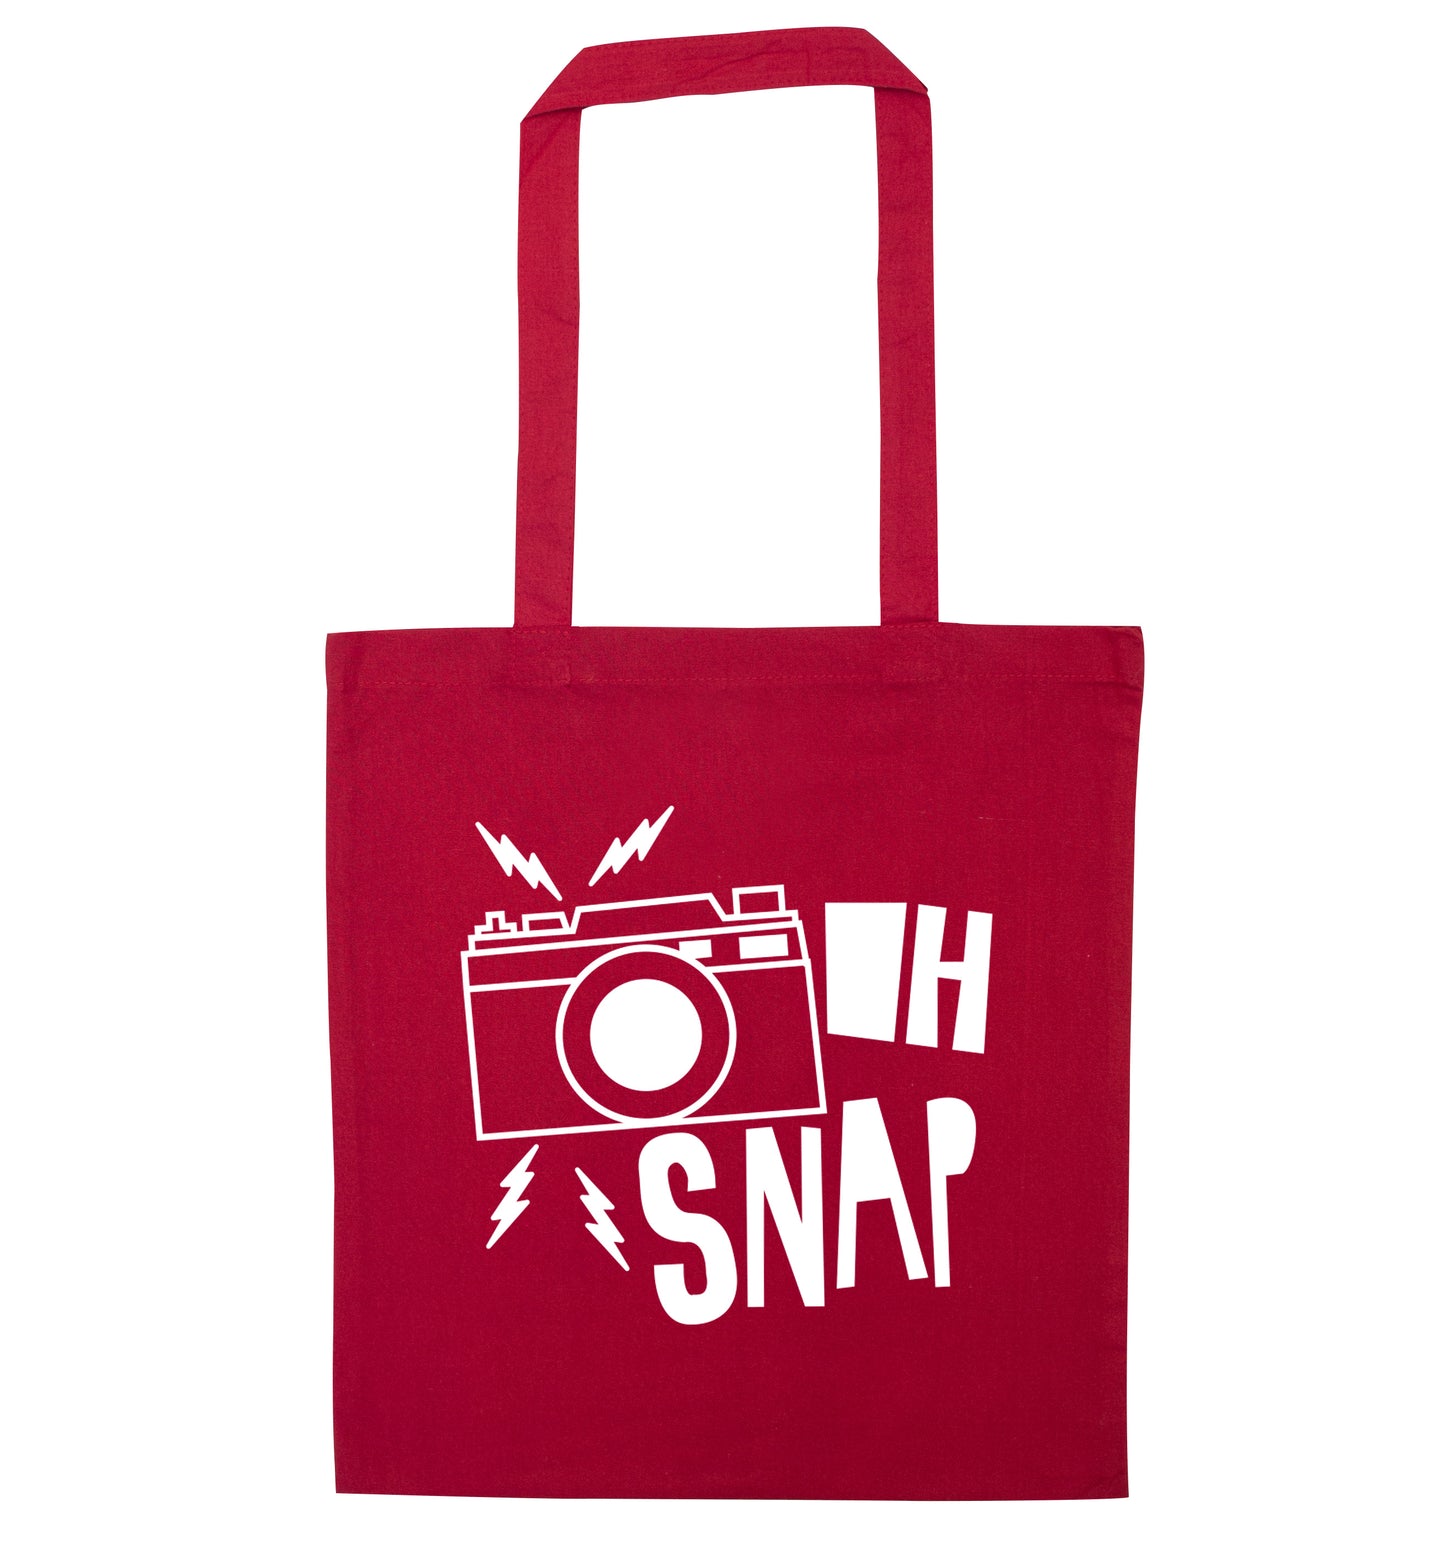 Oh Snap red tote bag